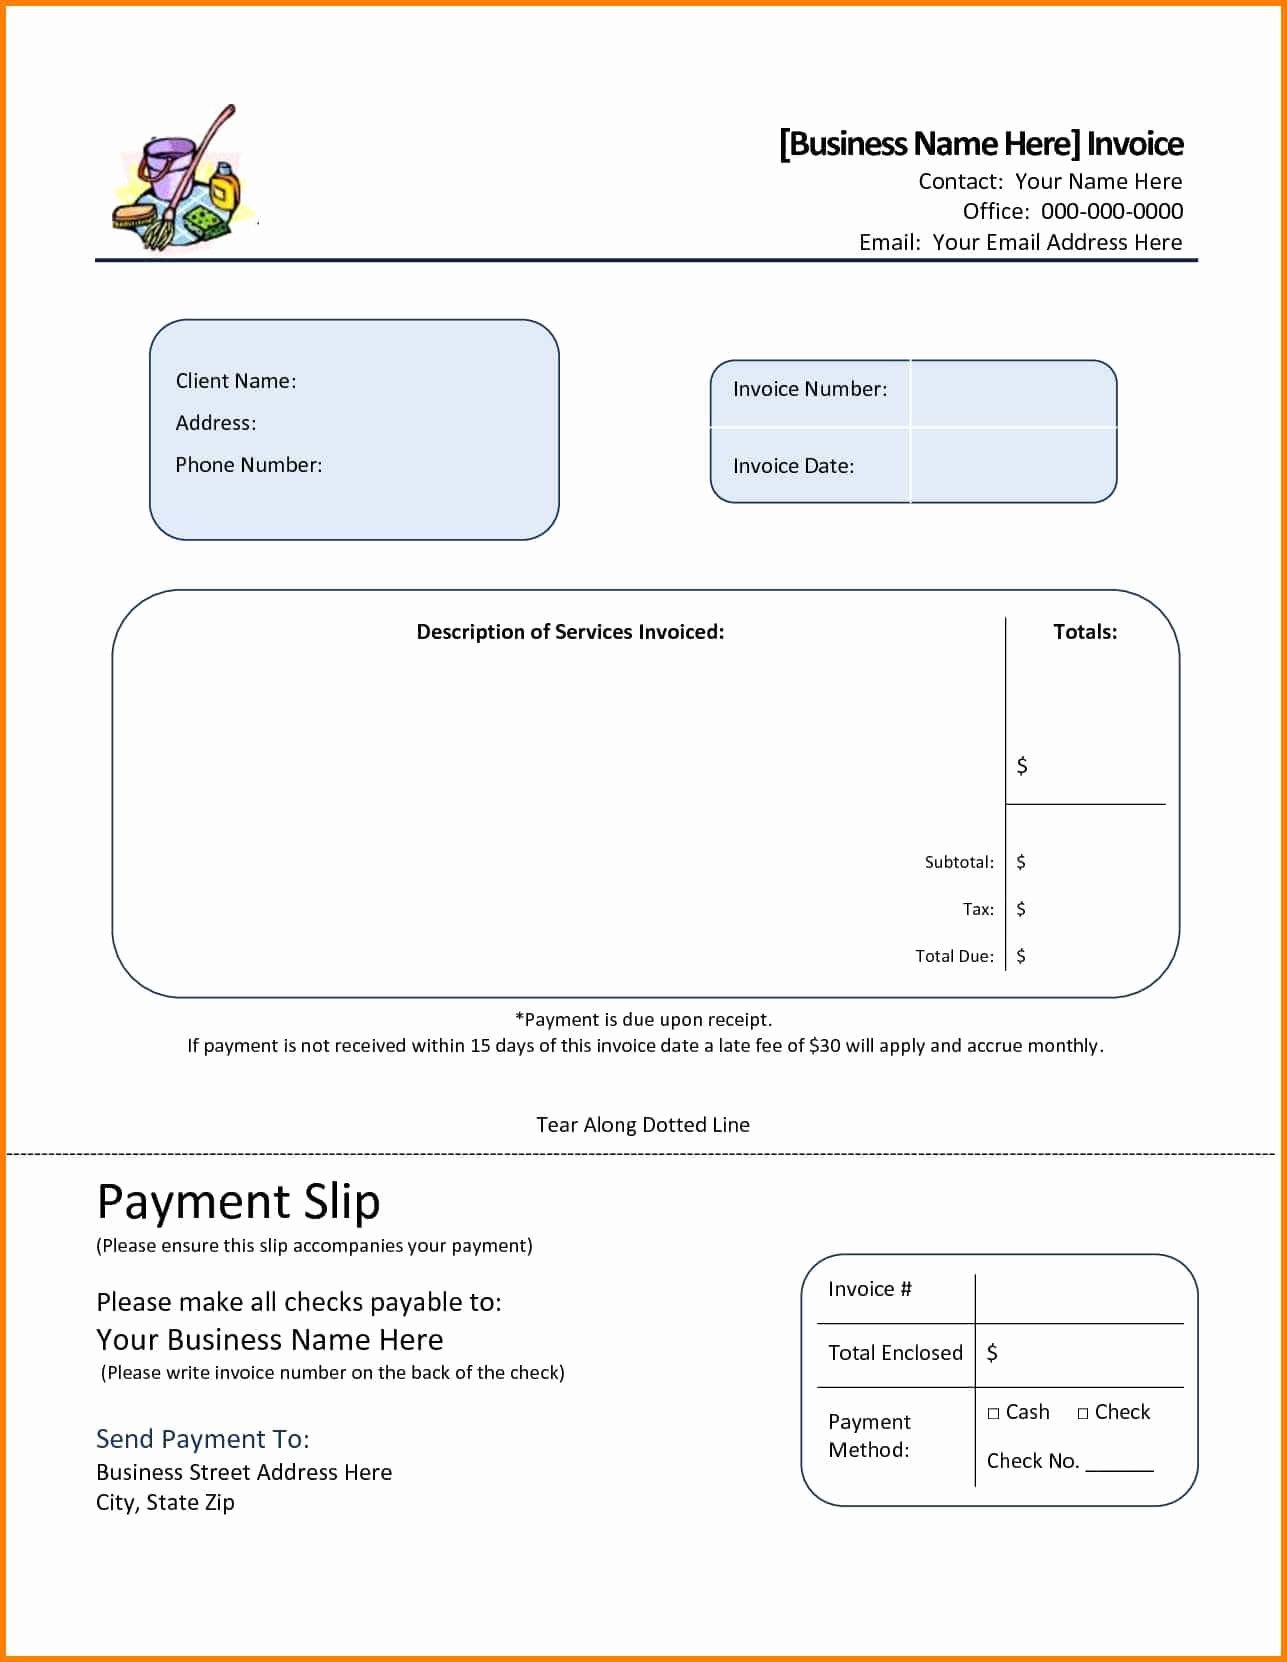 Carpet Cleaning Invoice Template Beautiful Self Employed Cleaner Invoice Template and Carpet Cleaning